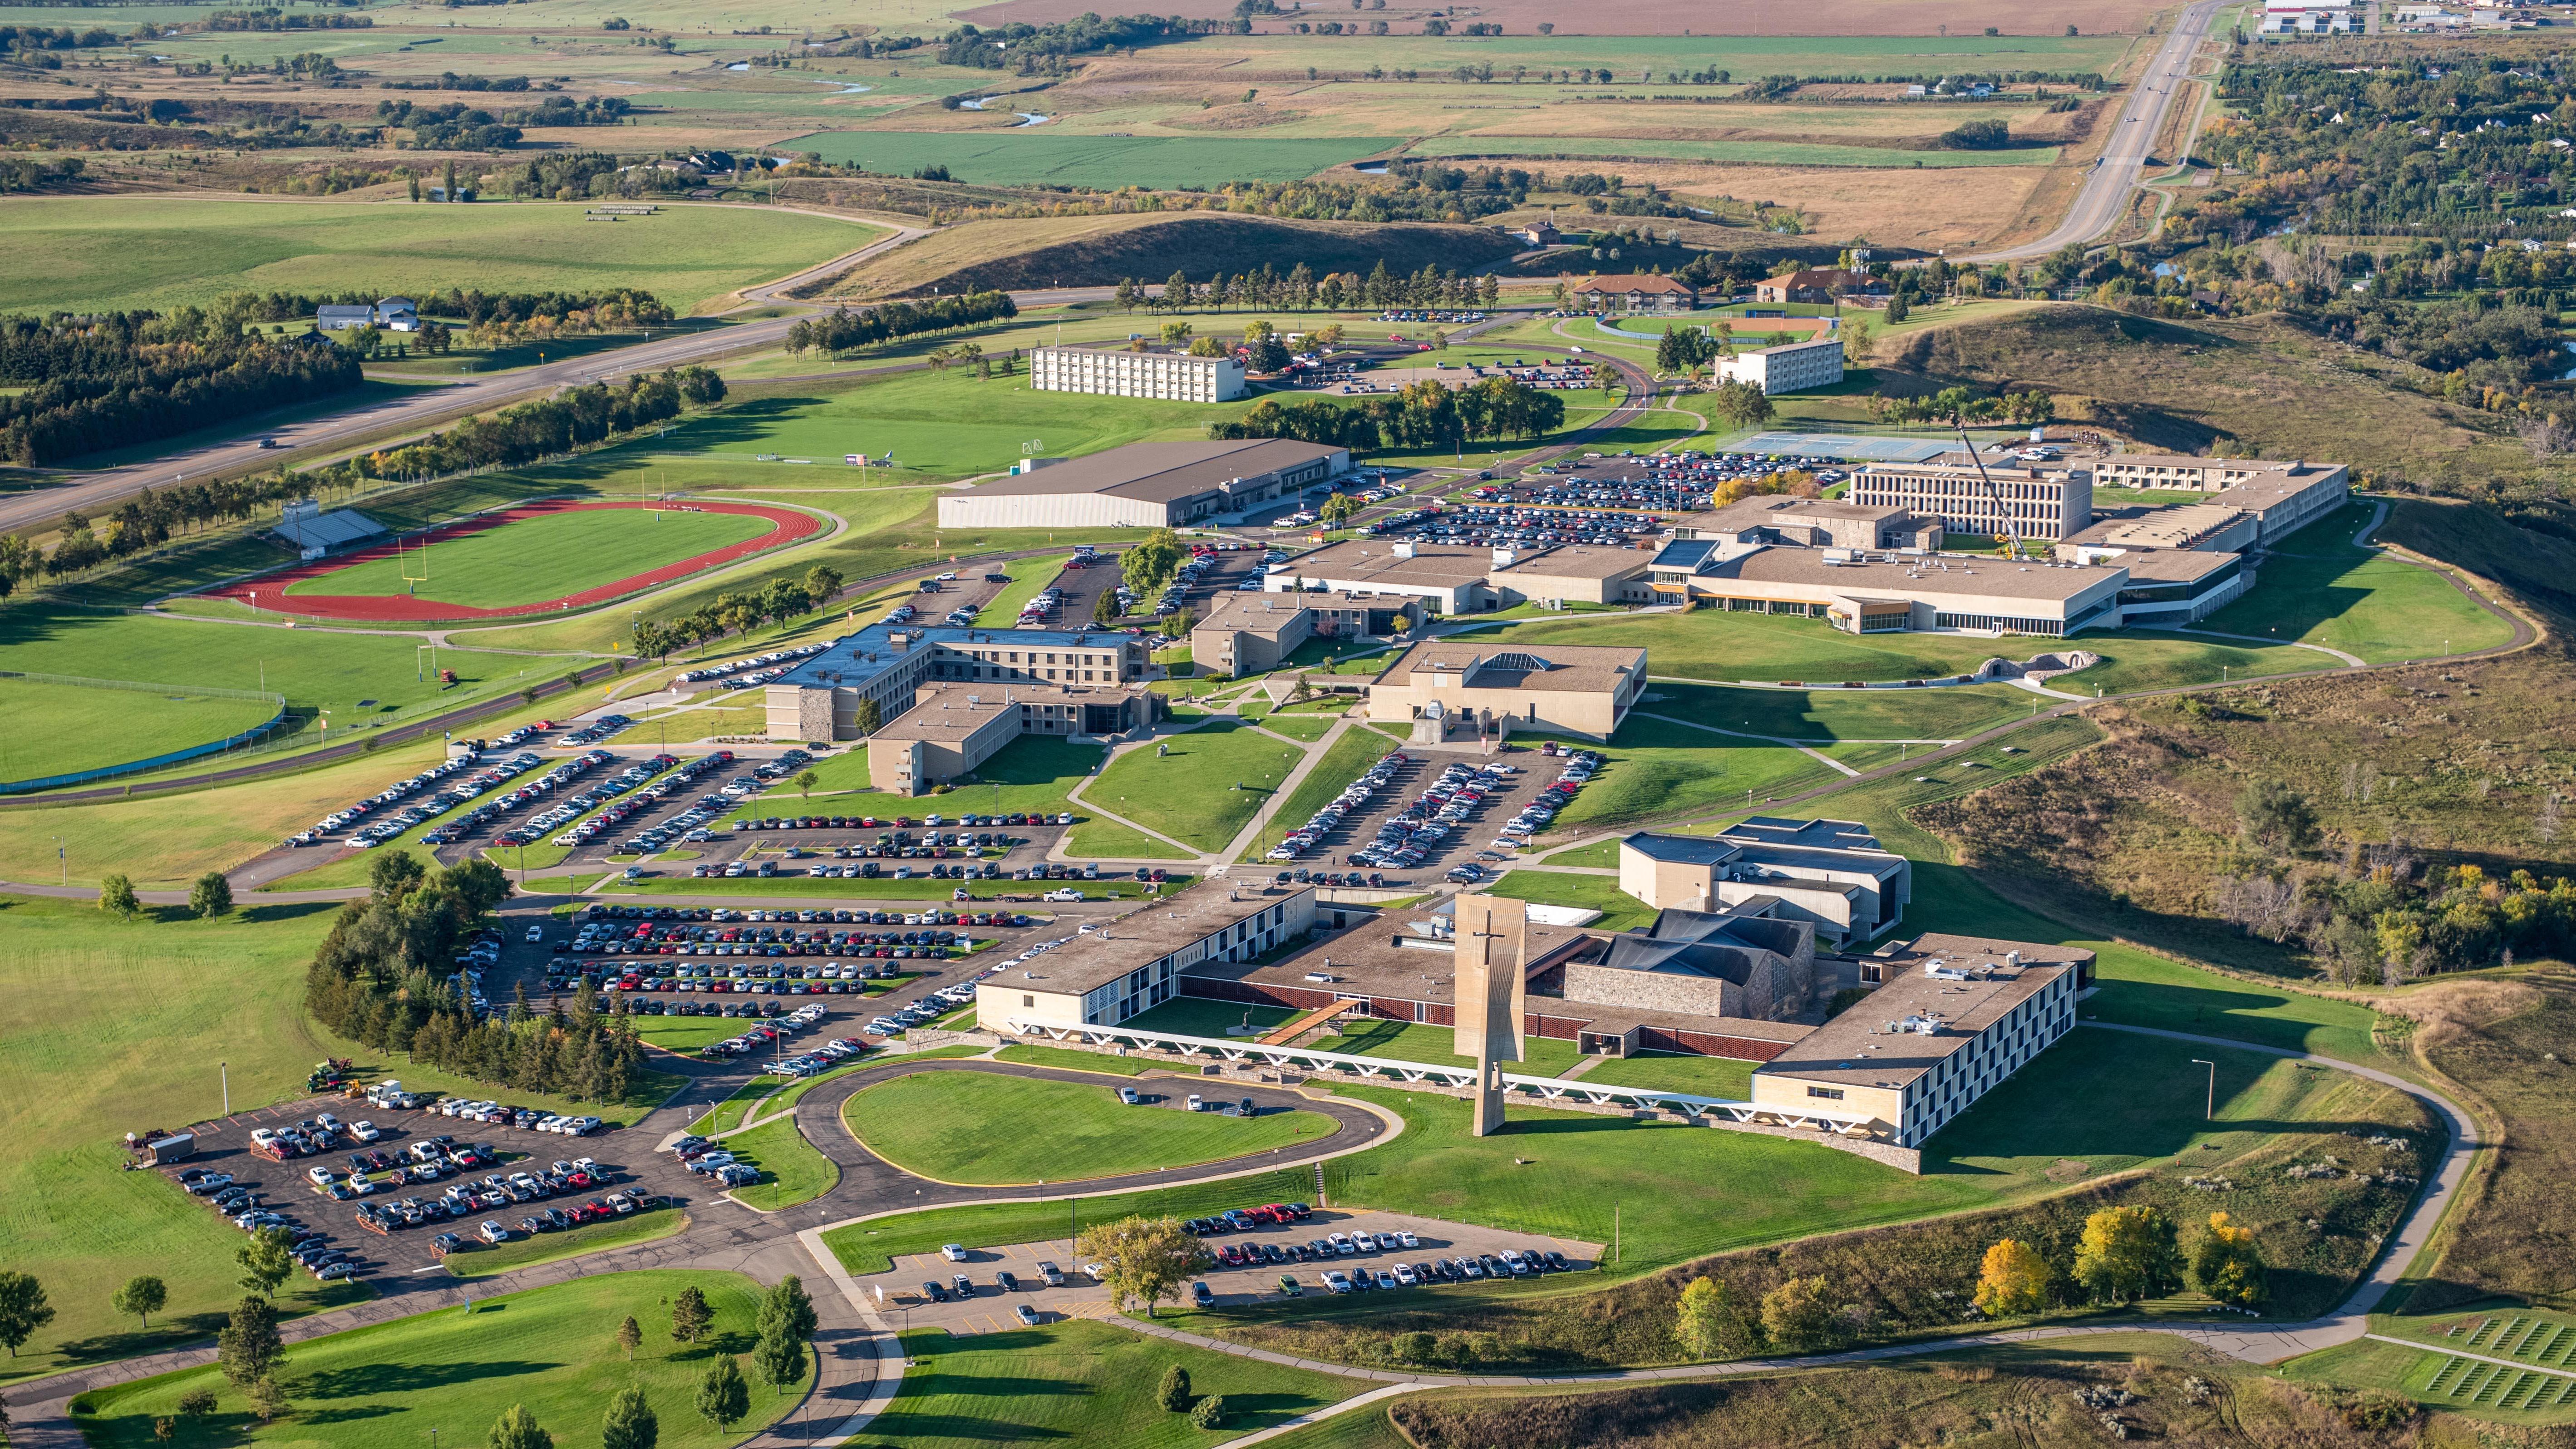 Aerial view of the University of Mary campus.